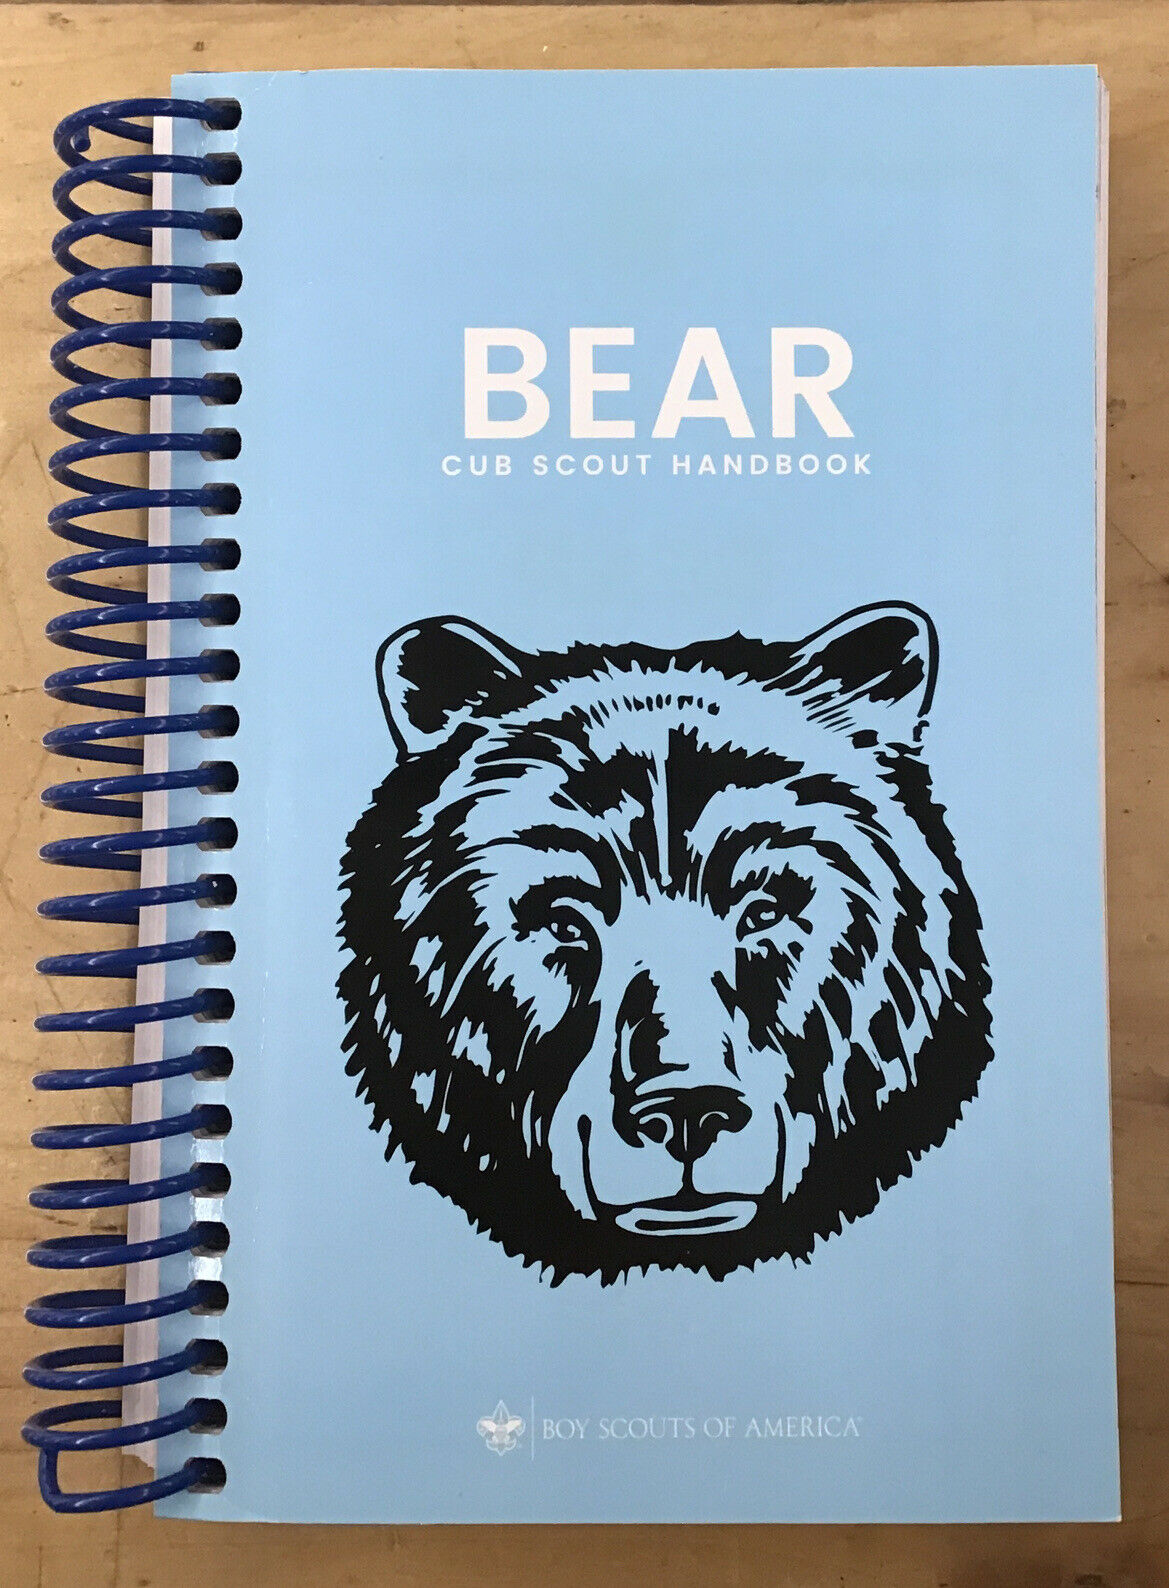 Bear Cub Scout Handbook From The Boy Scouts Of America 2018 Printing 34753